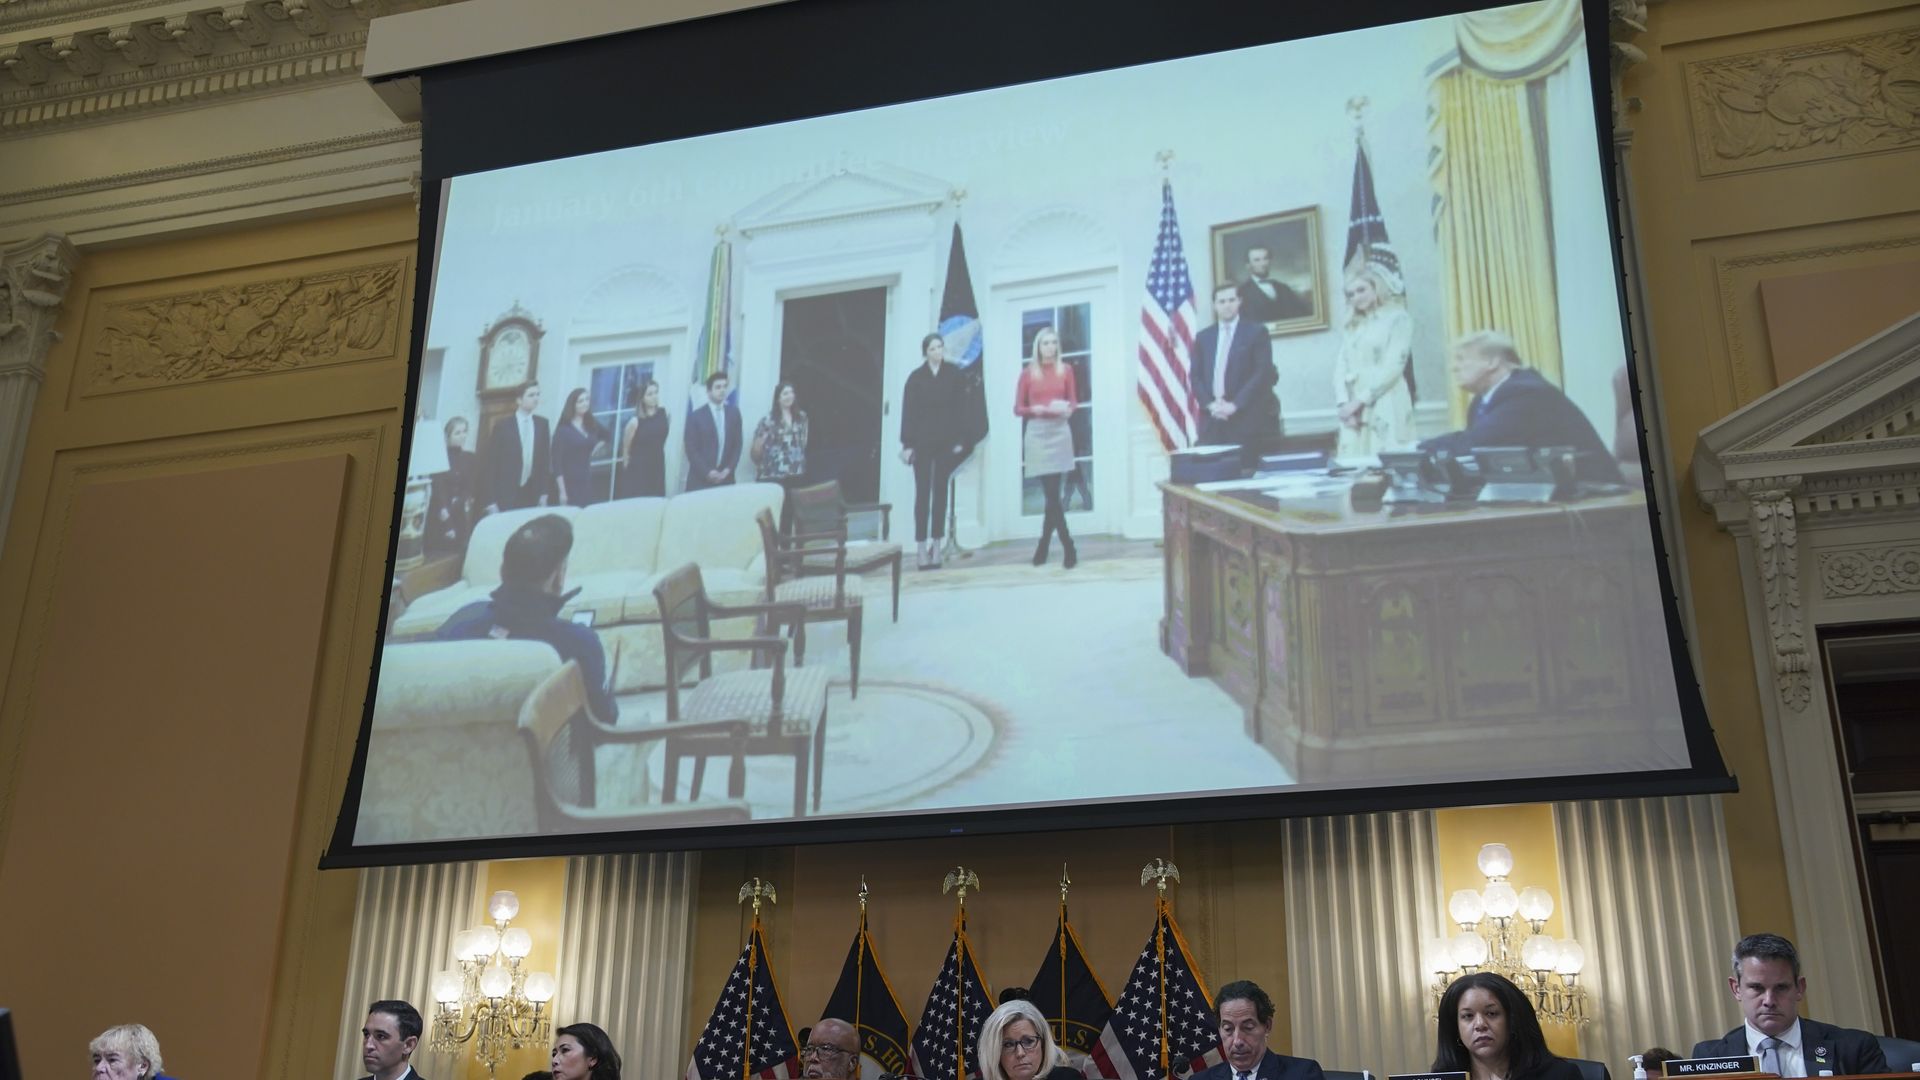 An image of former President Donald Trump, right, displayed on a screen during a hearing of the Select Committee to Investigate the January 6th Attack 